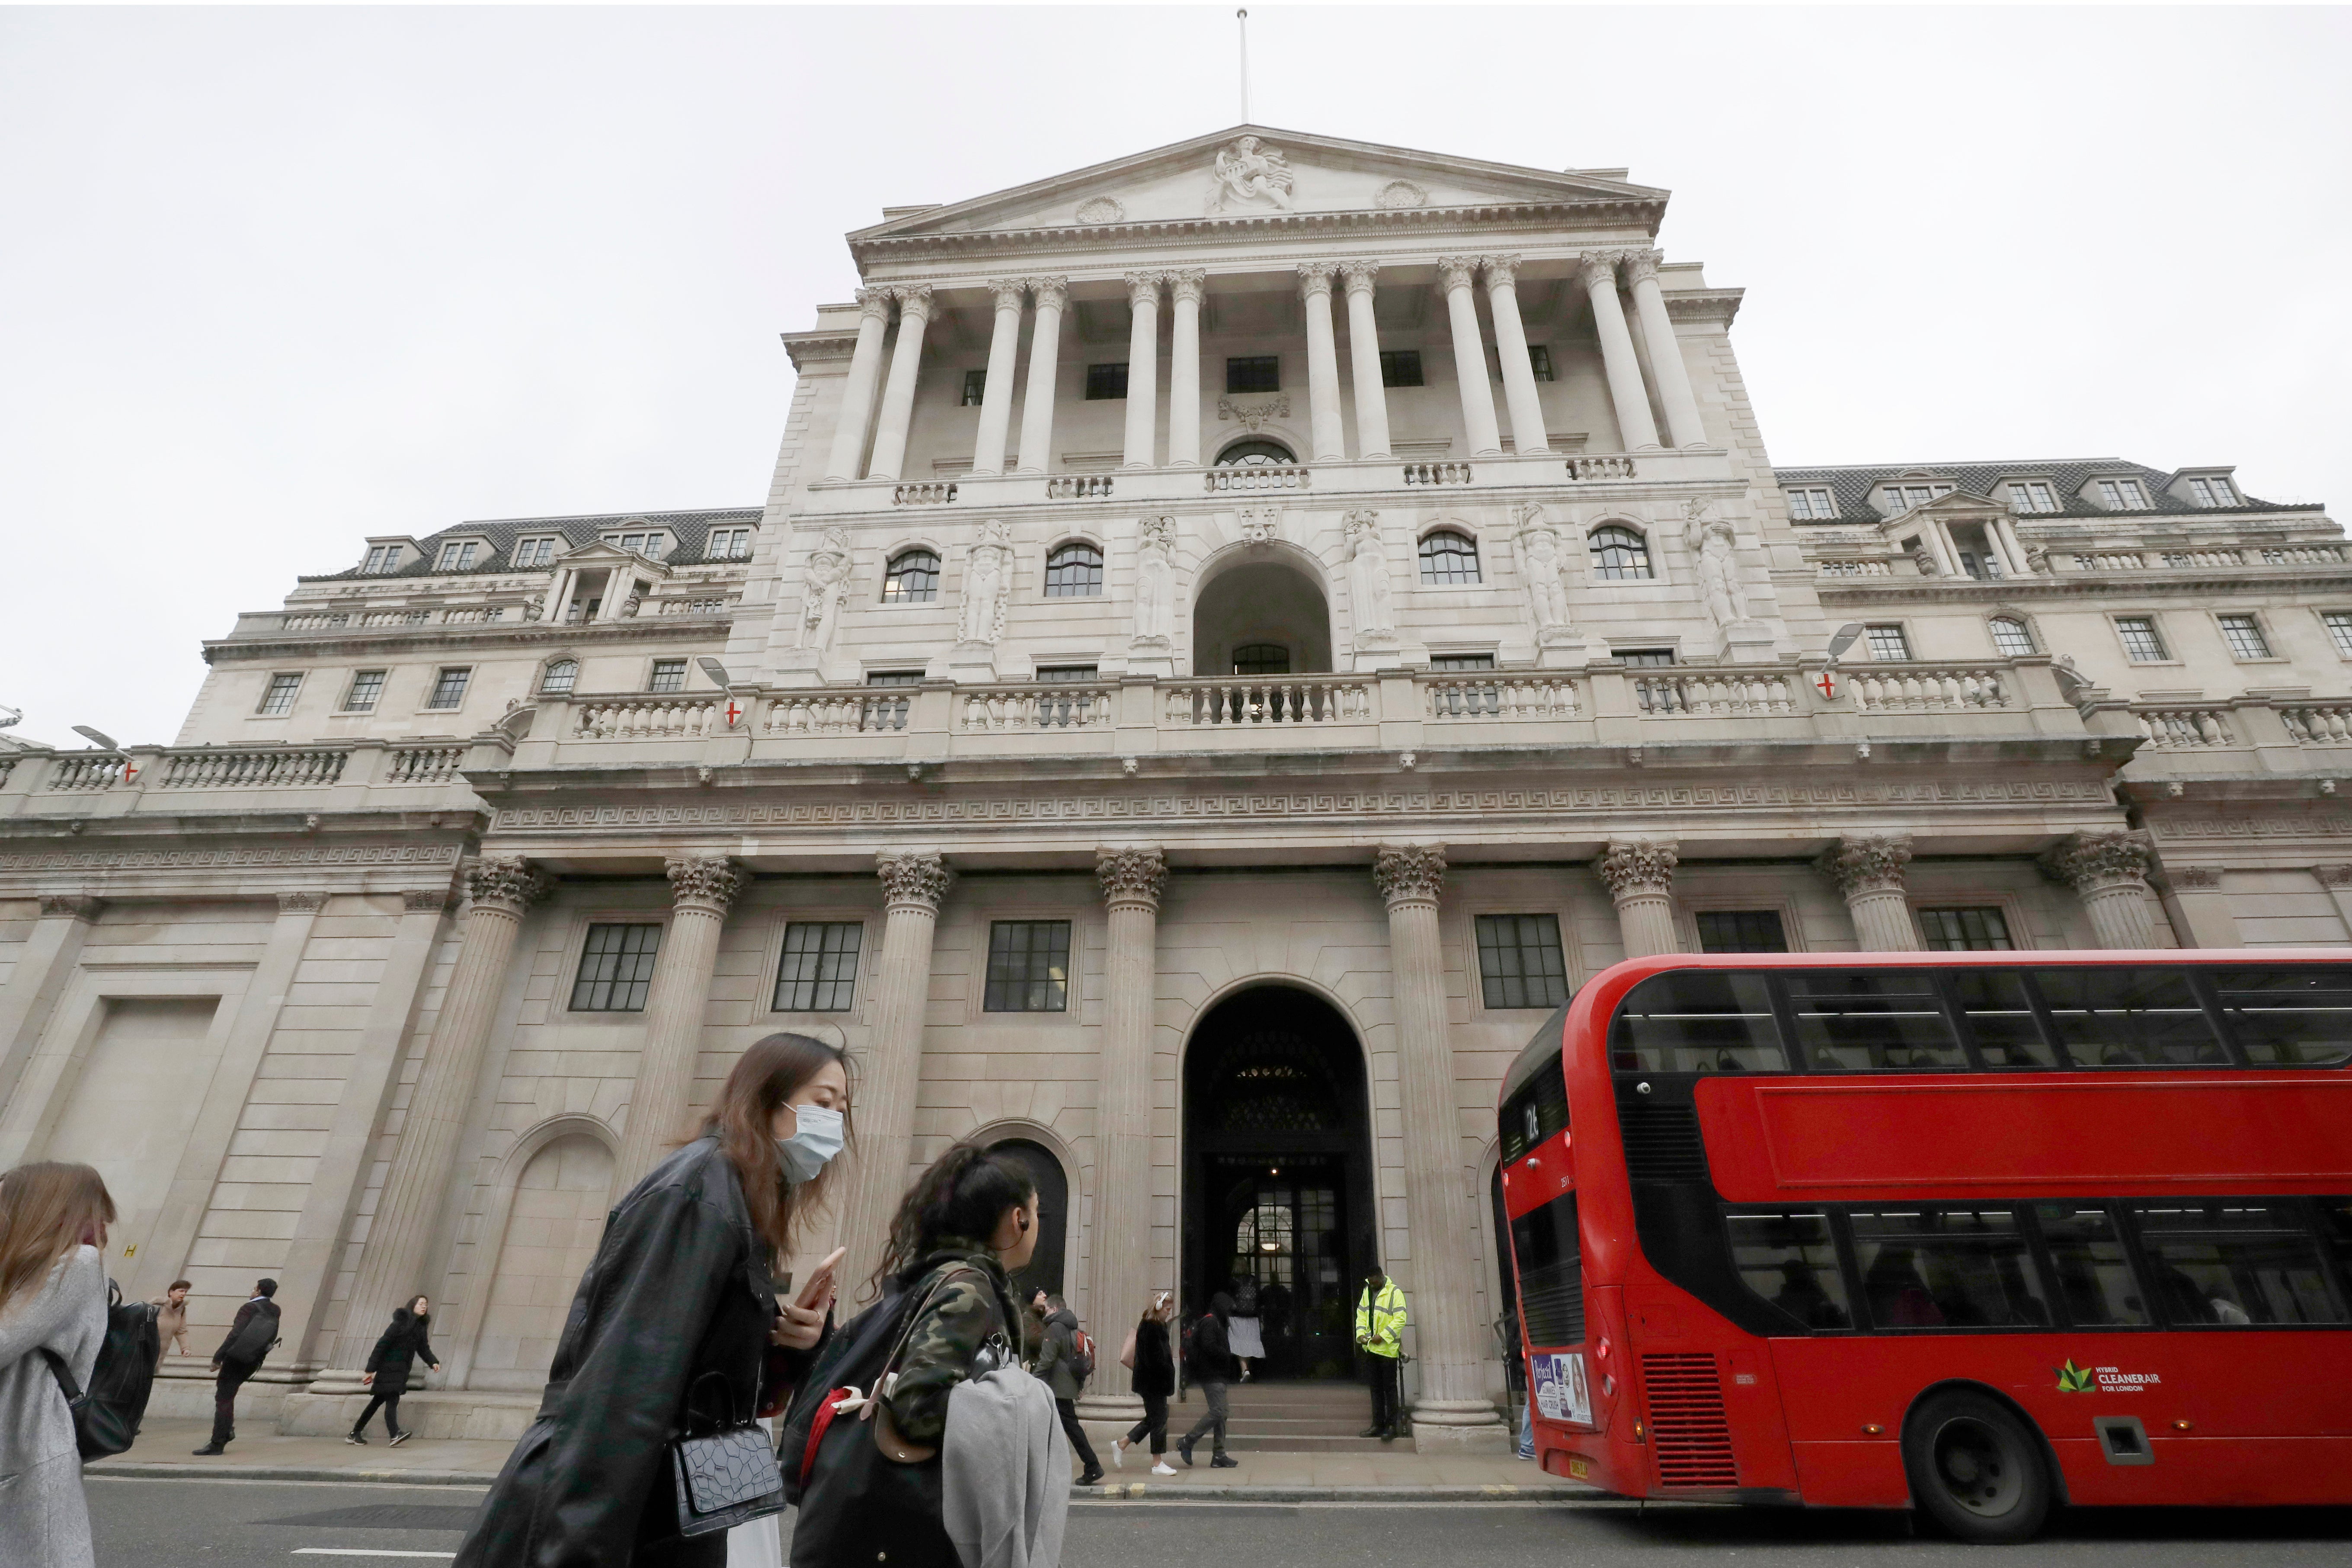 The Bank of England has £1tn worth of government bonds sitting on its balance sheet